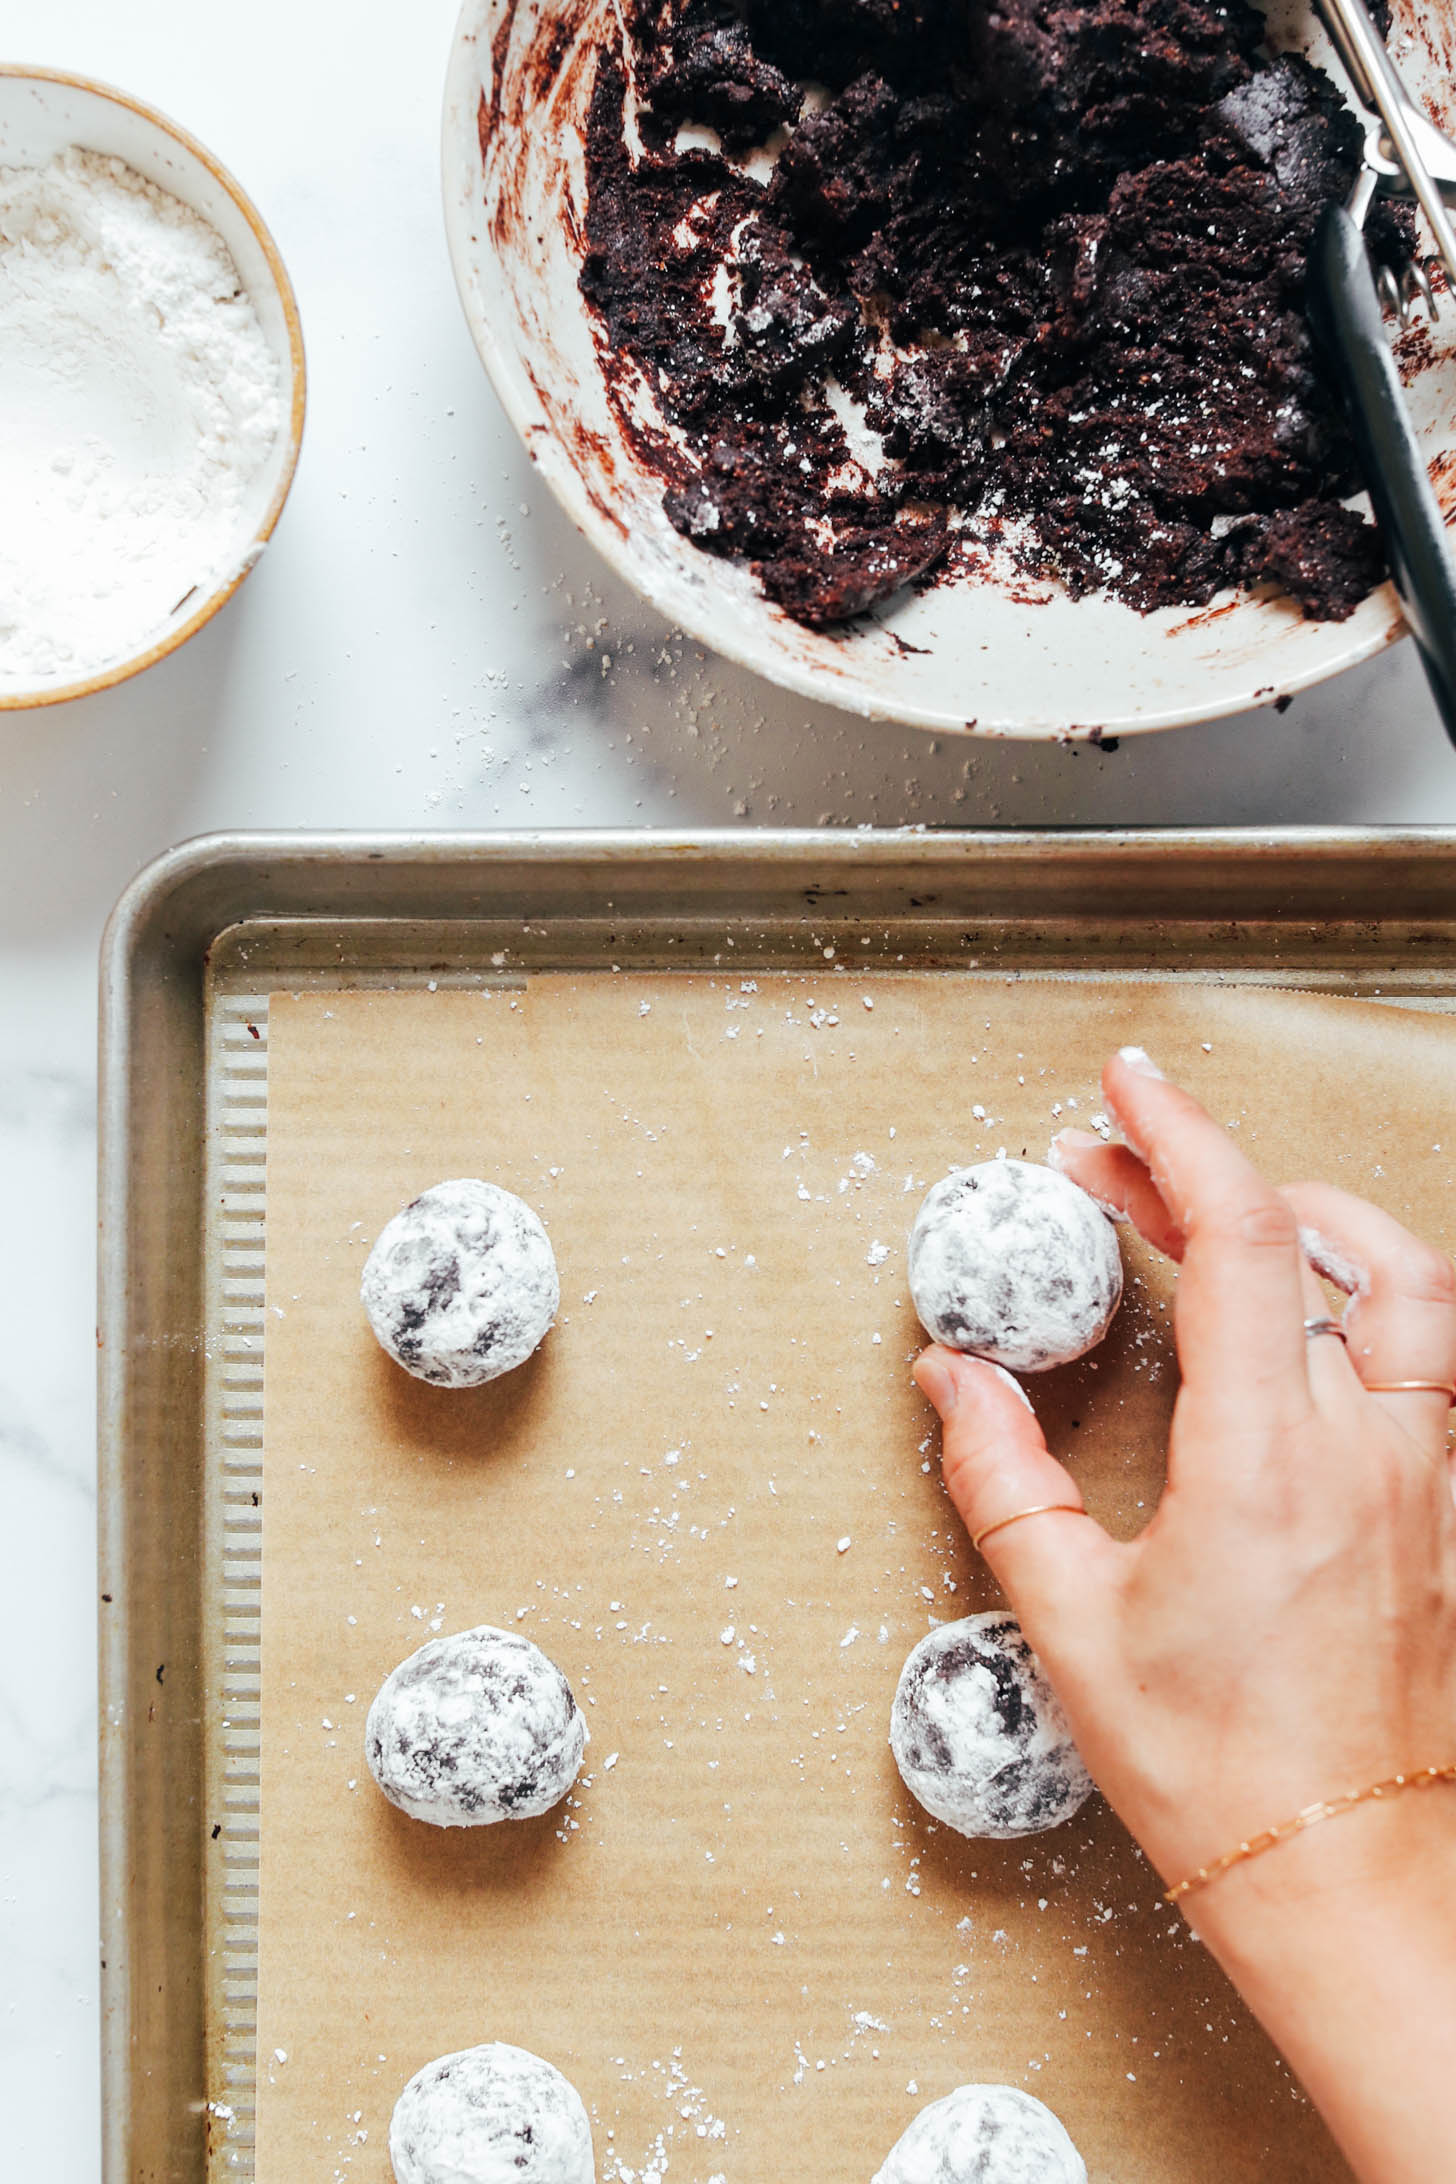 Placing balls of dough coated in powdered sugar onto a parchment-lined baking sheet